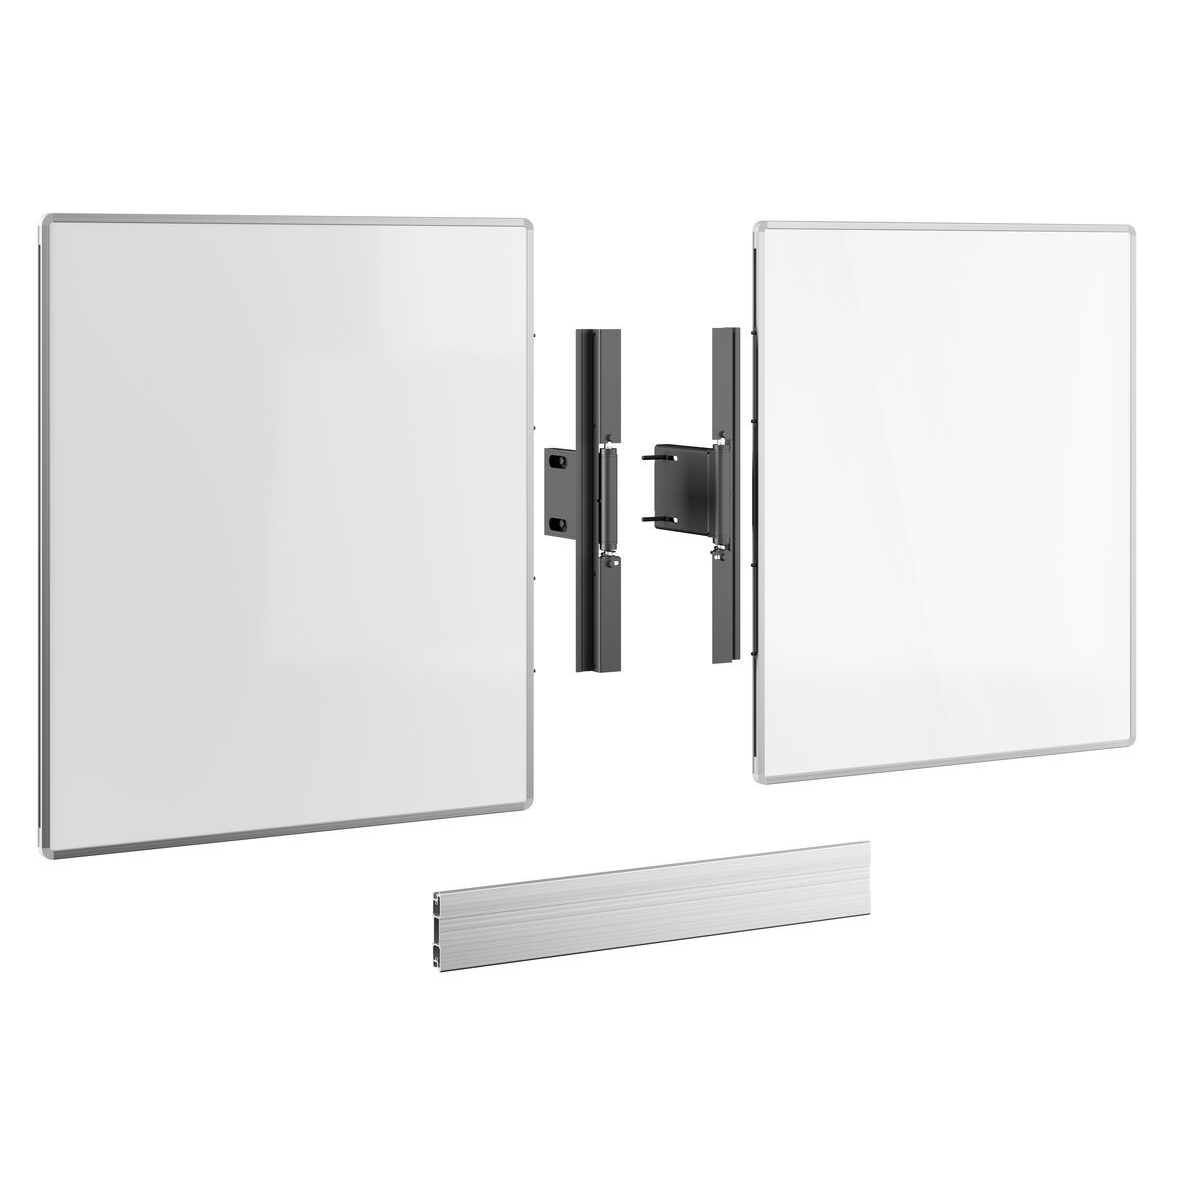 Vogels RISE A218 - 2x86" whiteboards set with adjustable hinges for a RISE floor-wall solution